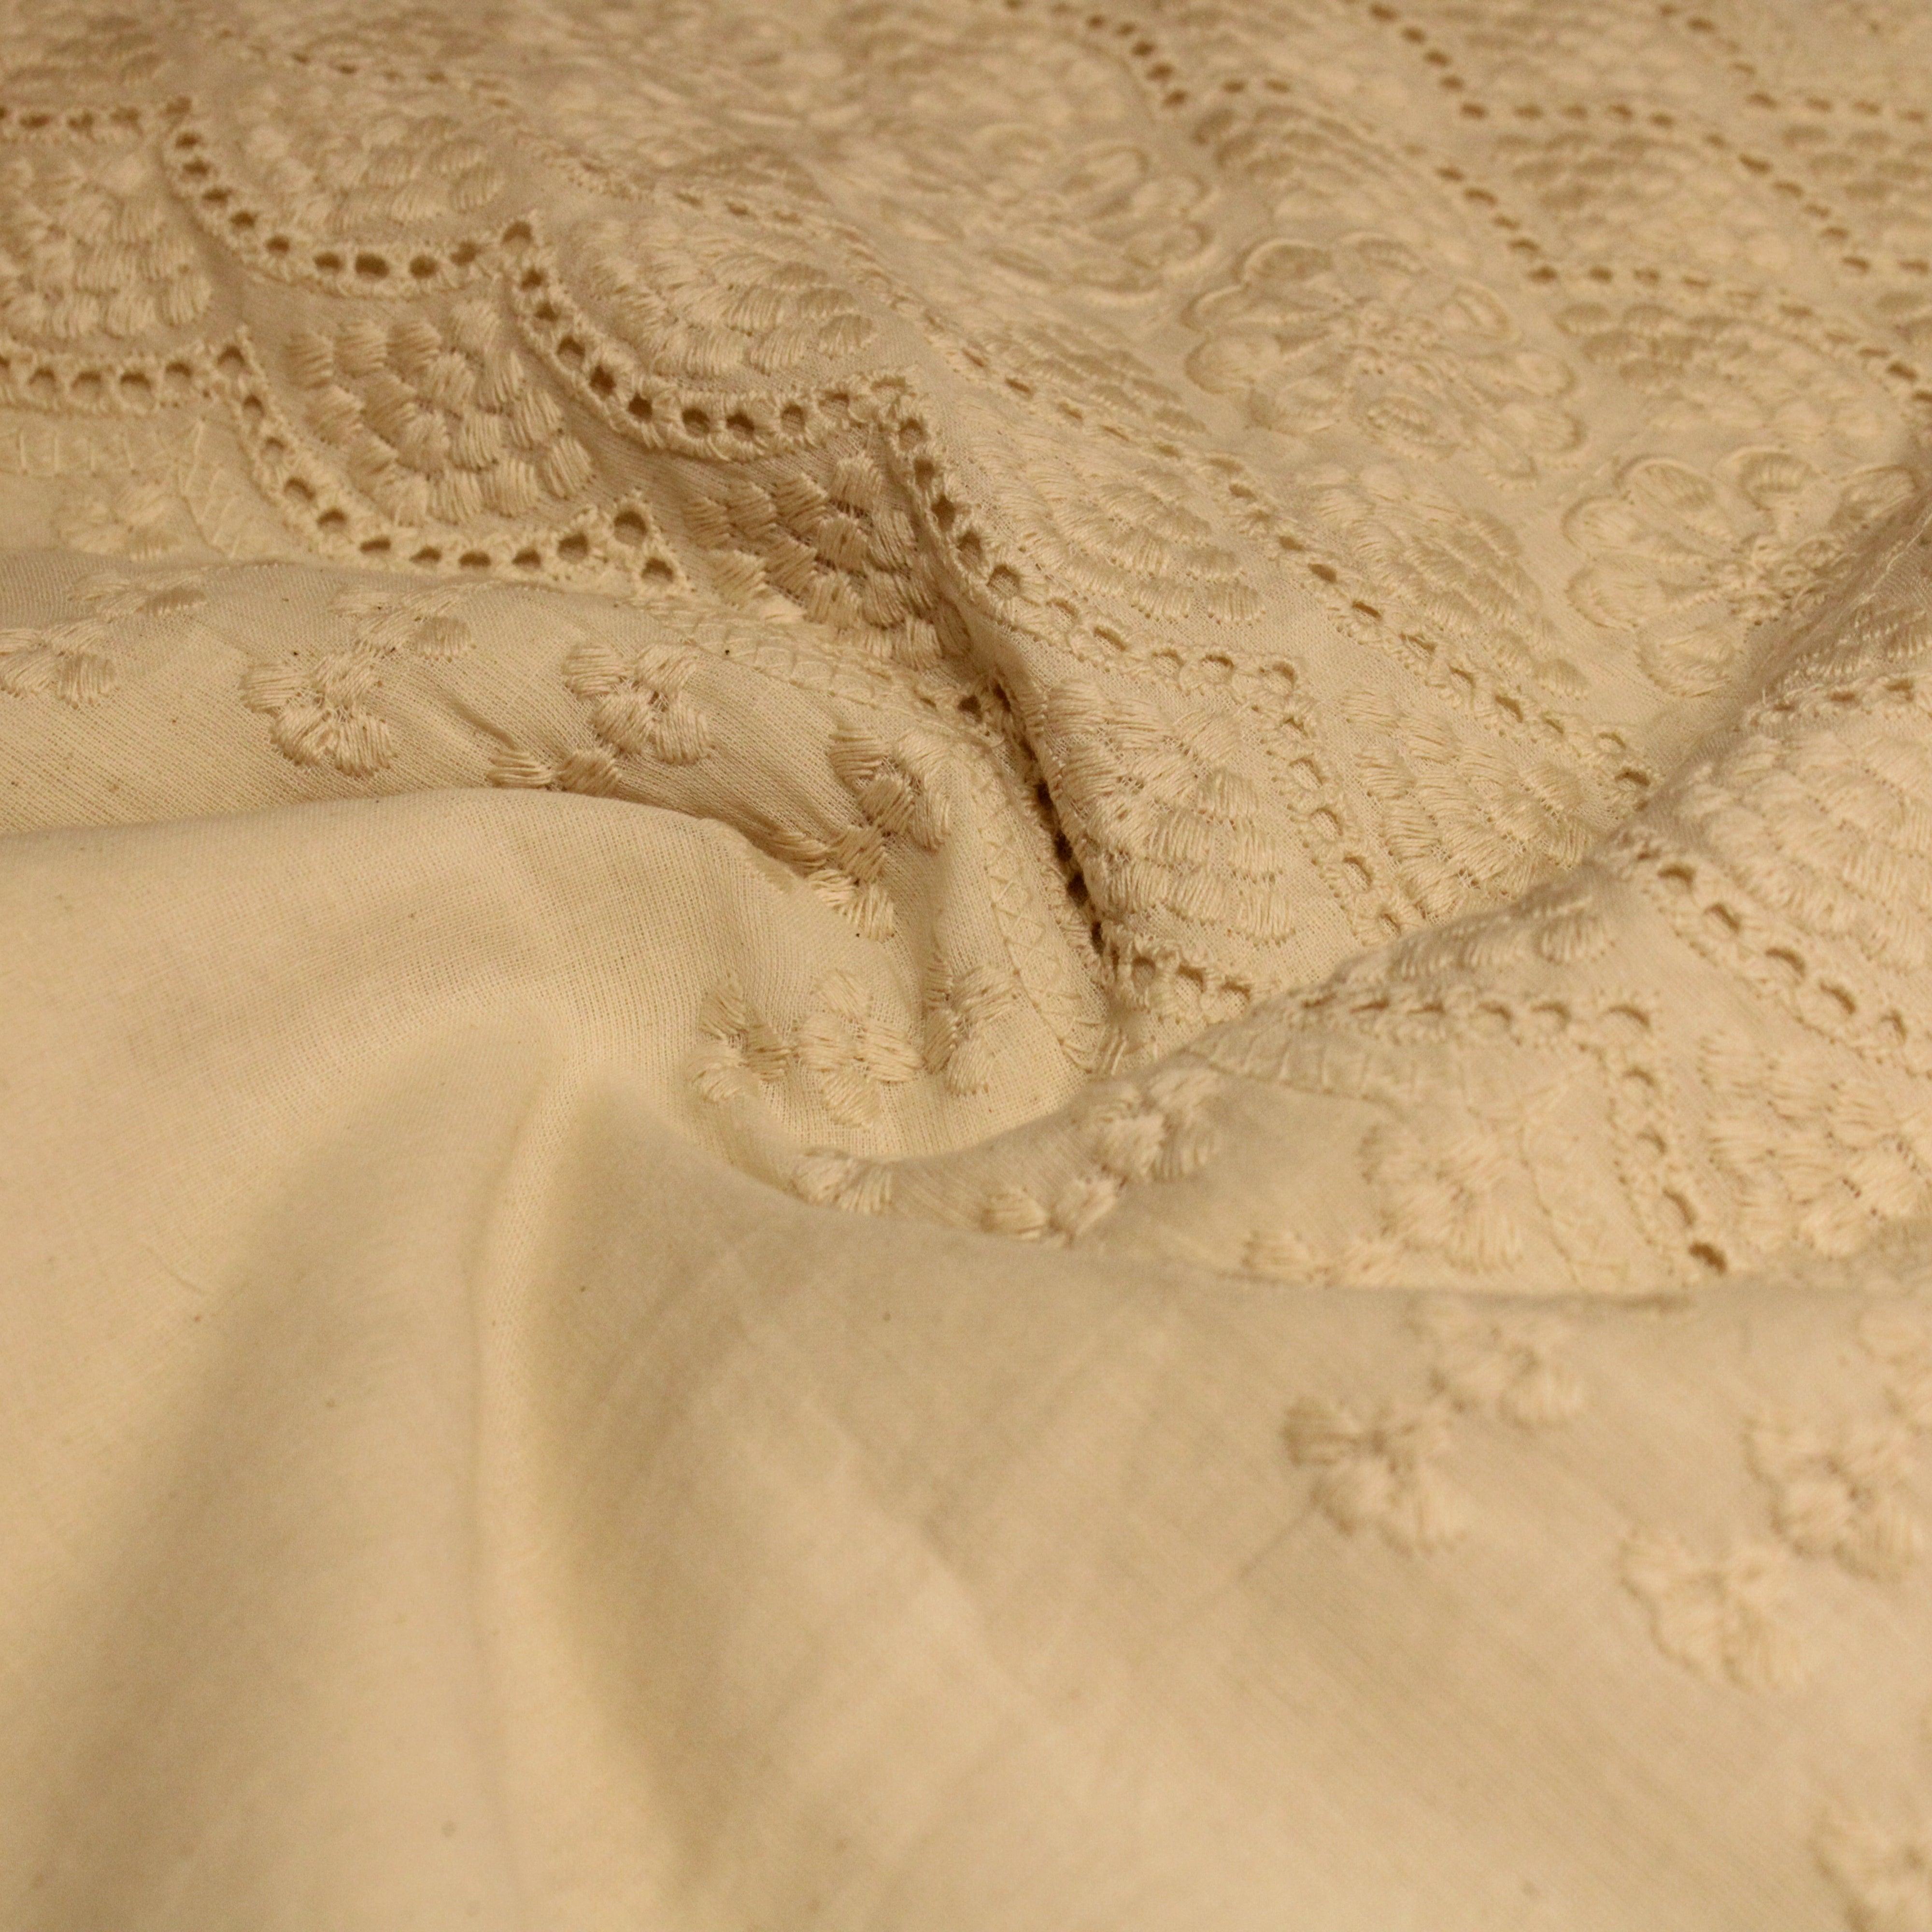 Natural Cotton Hakoba Woven Dyeable Fabric with panel embroidery - M'Foks